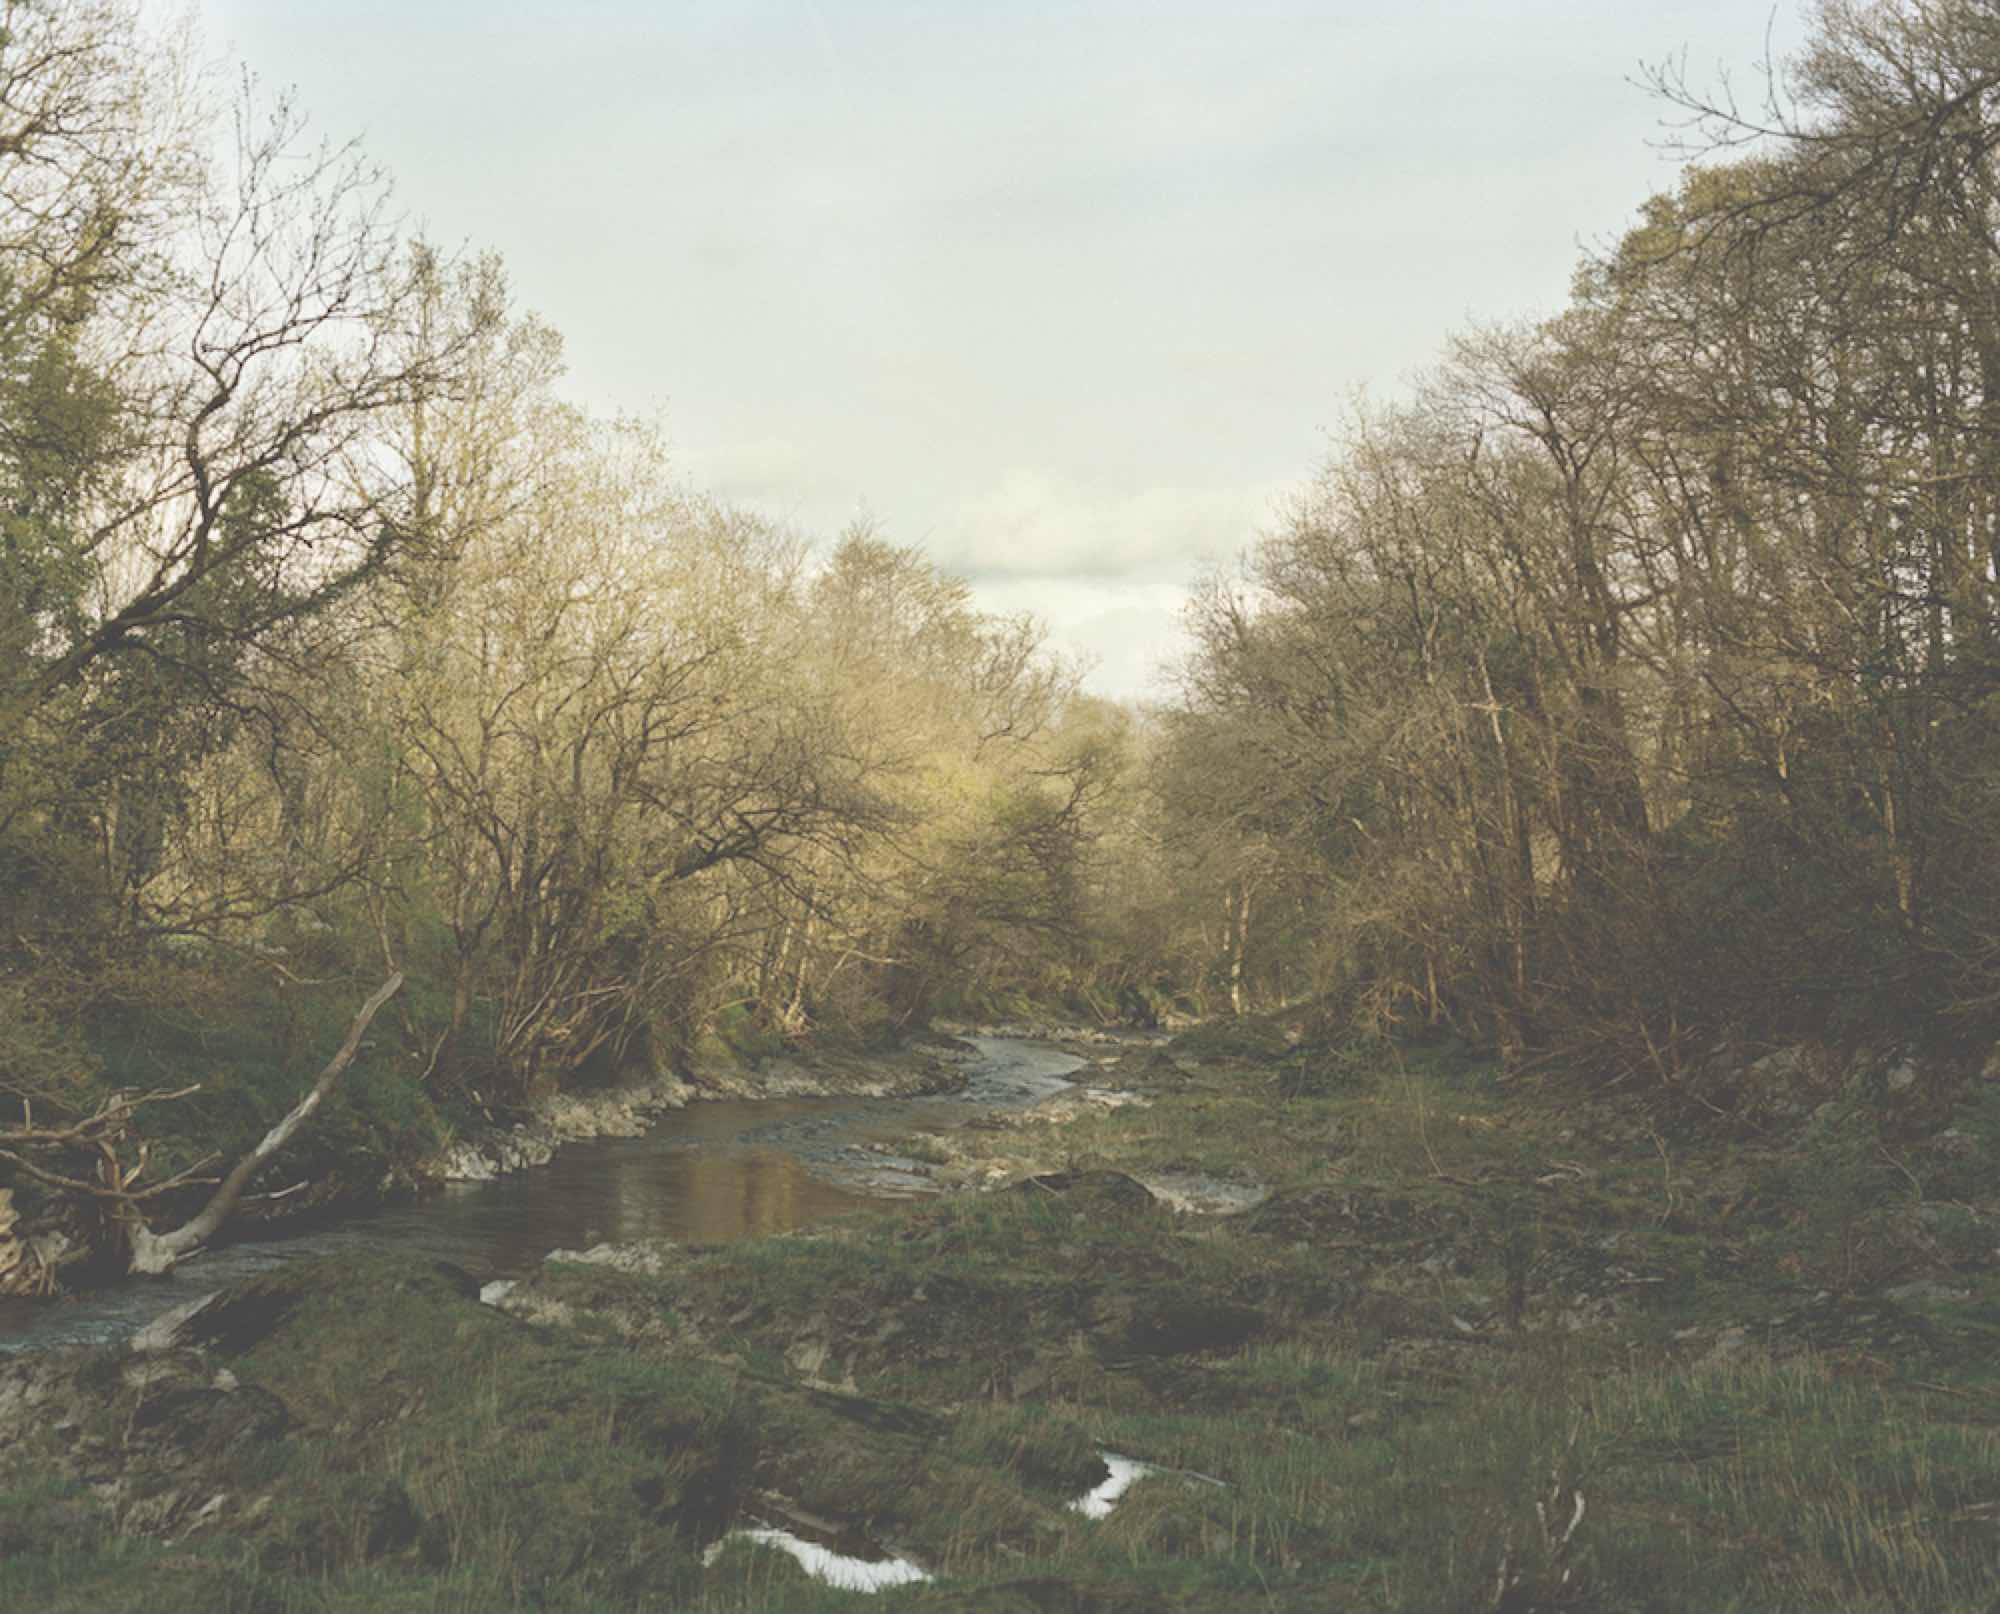 Cold water stream running through woods. Image for "Gather Cook Feast" by Jessica Seaton. Photo by Nick Seaton.